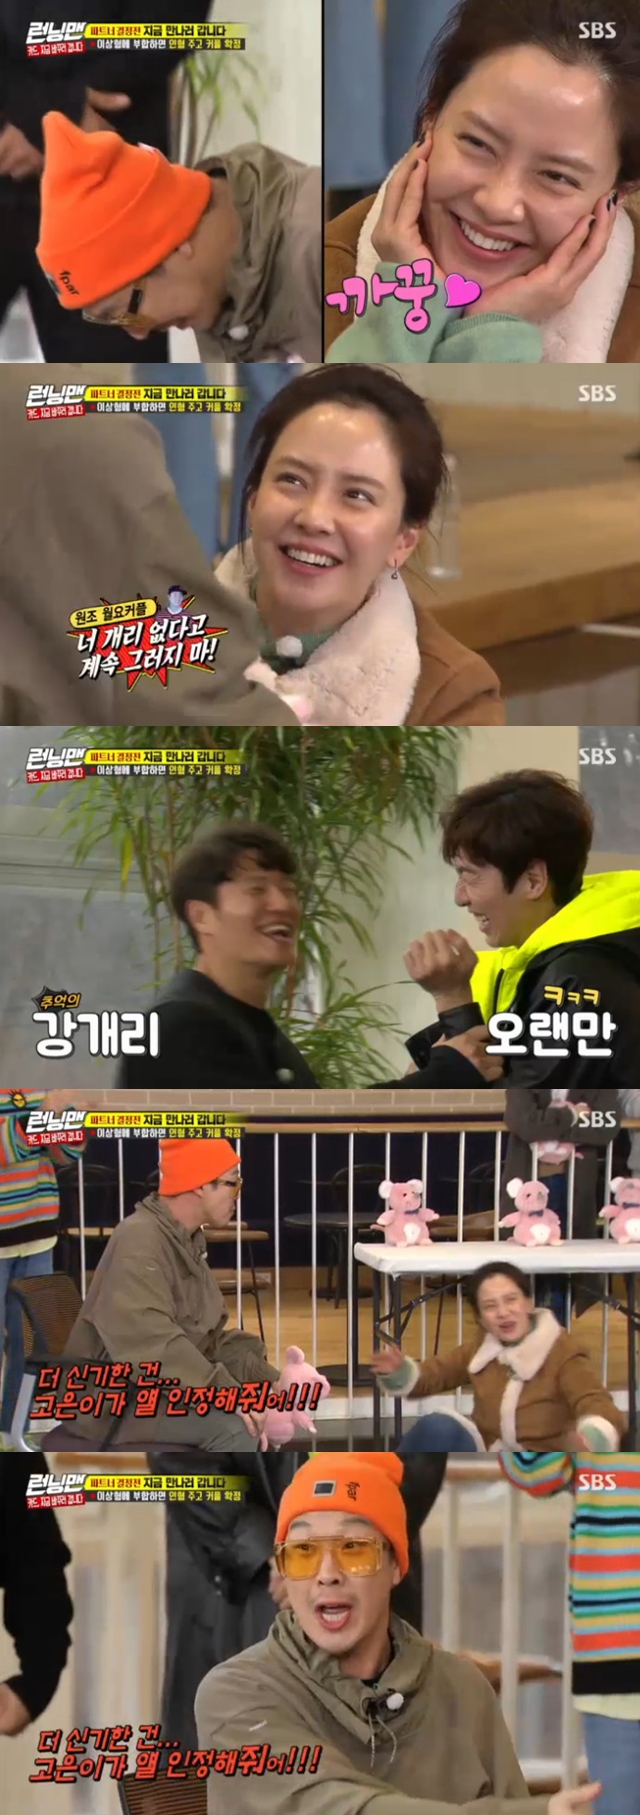 The name of Gary, an early member of Running Man, appeared in surprise.On January 19, SBS Running Man, a partner decision was held.It was Song Ji-hyo who sent a love call to Haha.Song Ji-hyo was charming in front of a startled Haha, but Haha blew a point blank to make everyone laugh, saying, Do not keep saying you are not Gary.So Song Ji-hyo said, Who is Gary?Song Ji-hyo has gathered topics with Gary and Running Man official love line, but Gary is now getting off at Running Man.bak-beauty